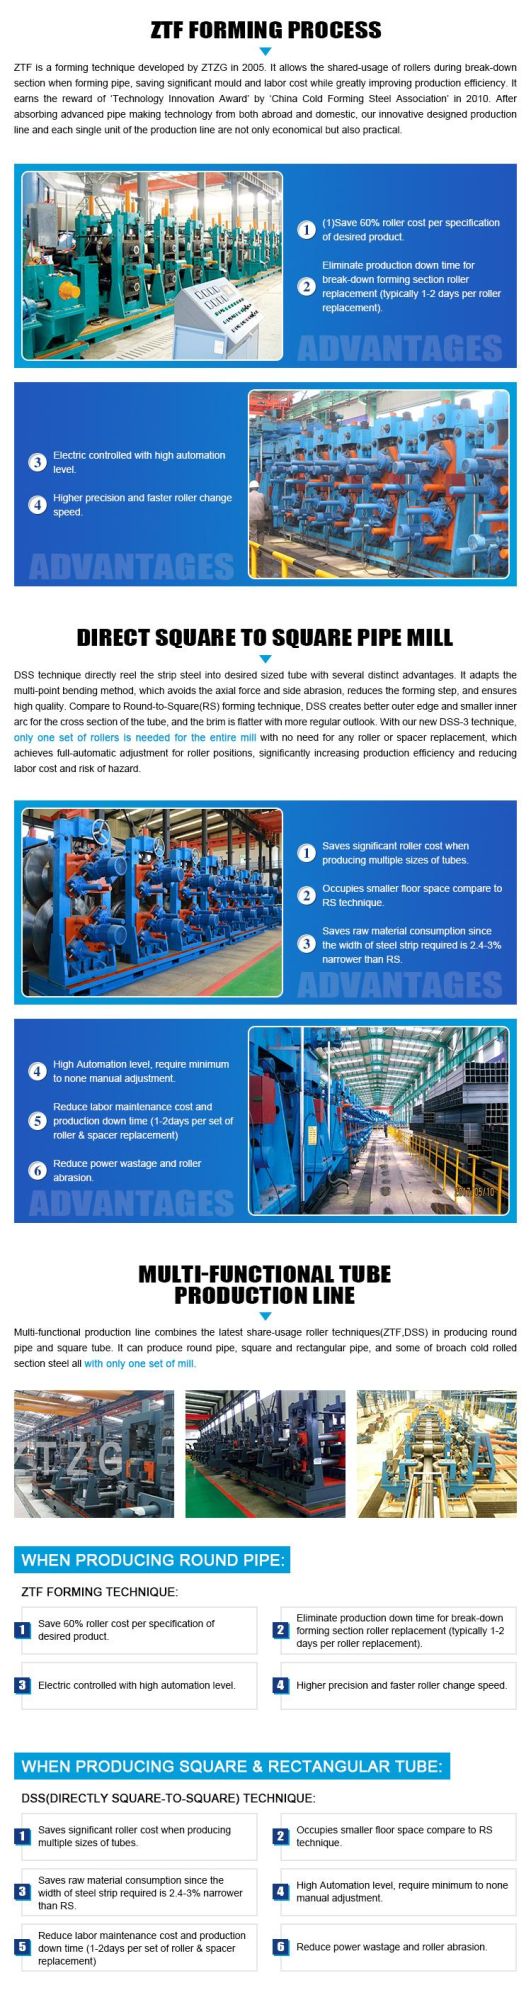 Carbon Steel Iron Welded Round Tube Pipe Production Line Pipe Making Machinery